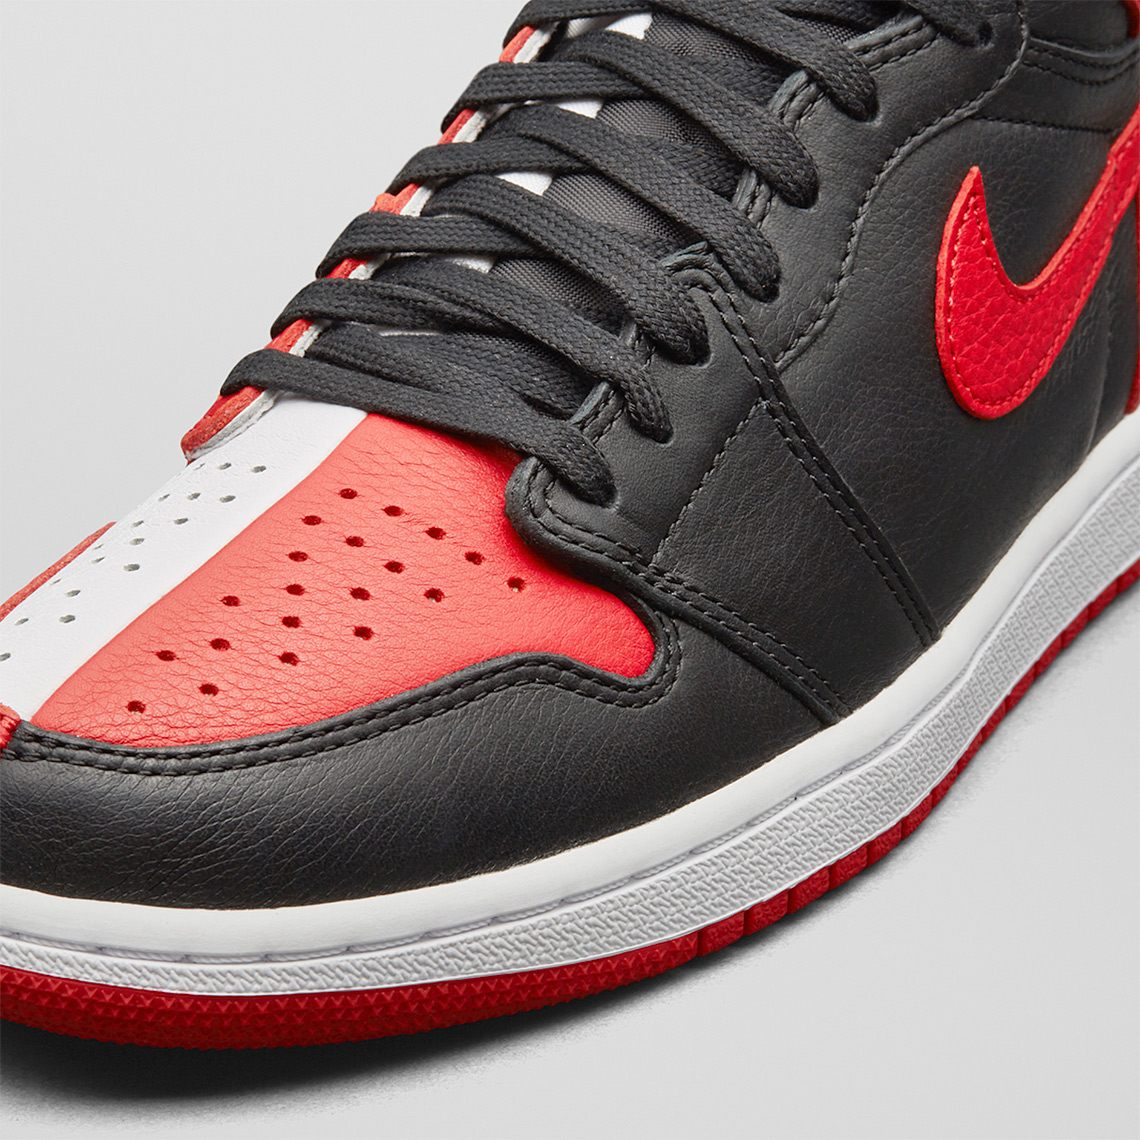 Air Jordan 1 Homage To Home Release Info 2300 Pairs 2